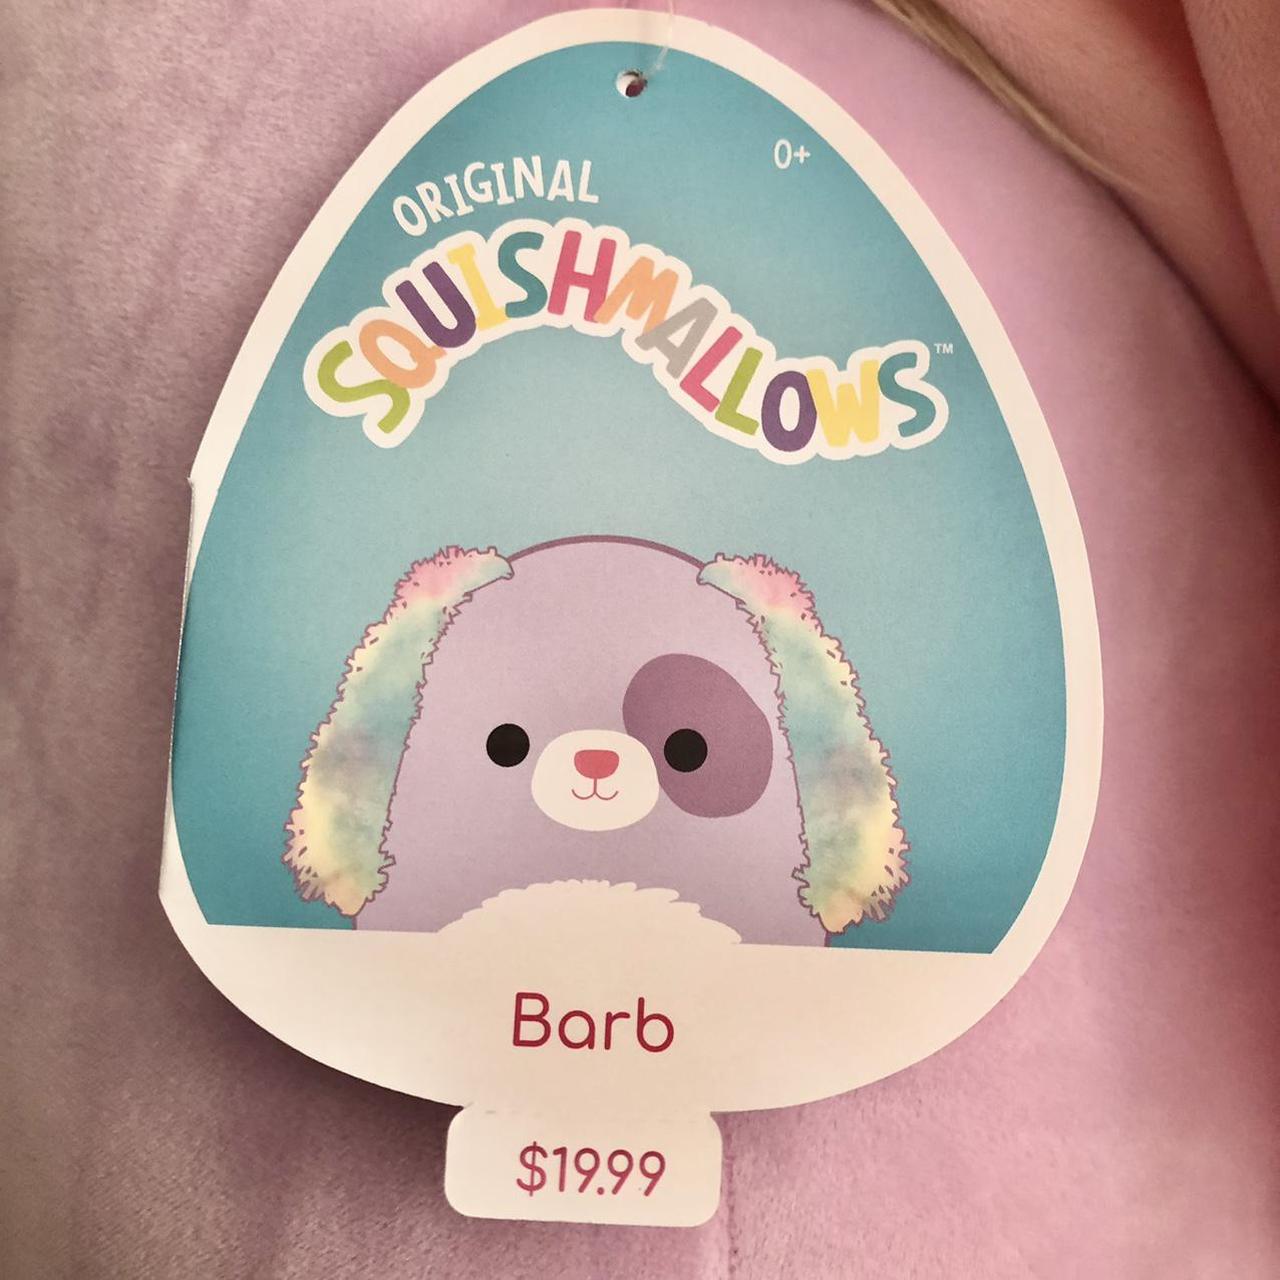 NWT 16” Barb the purple dog squishmallow! She has... - Depop